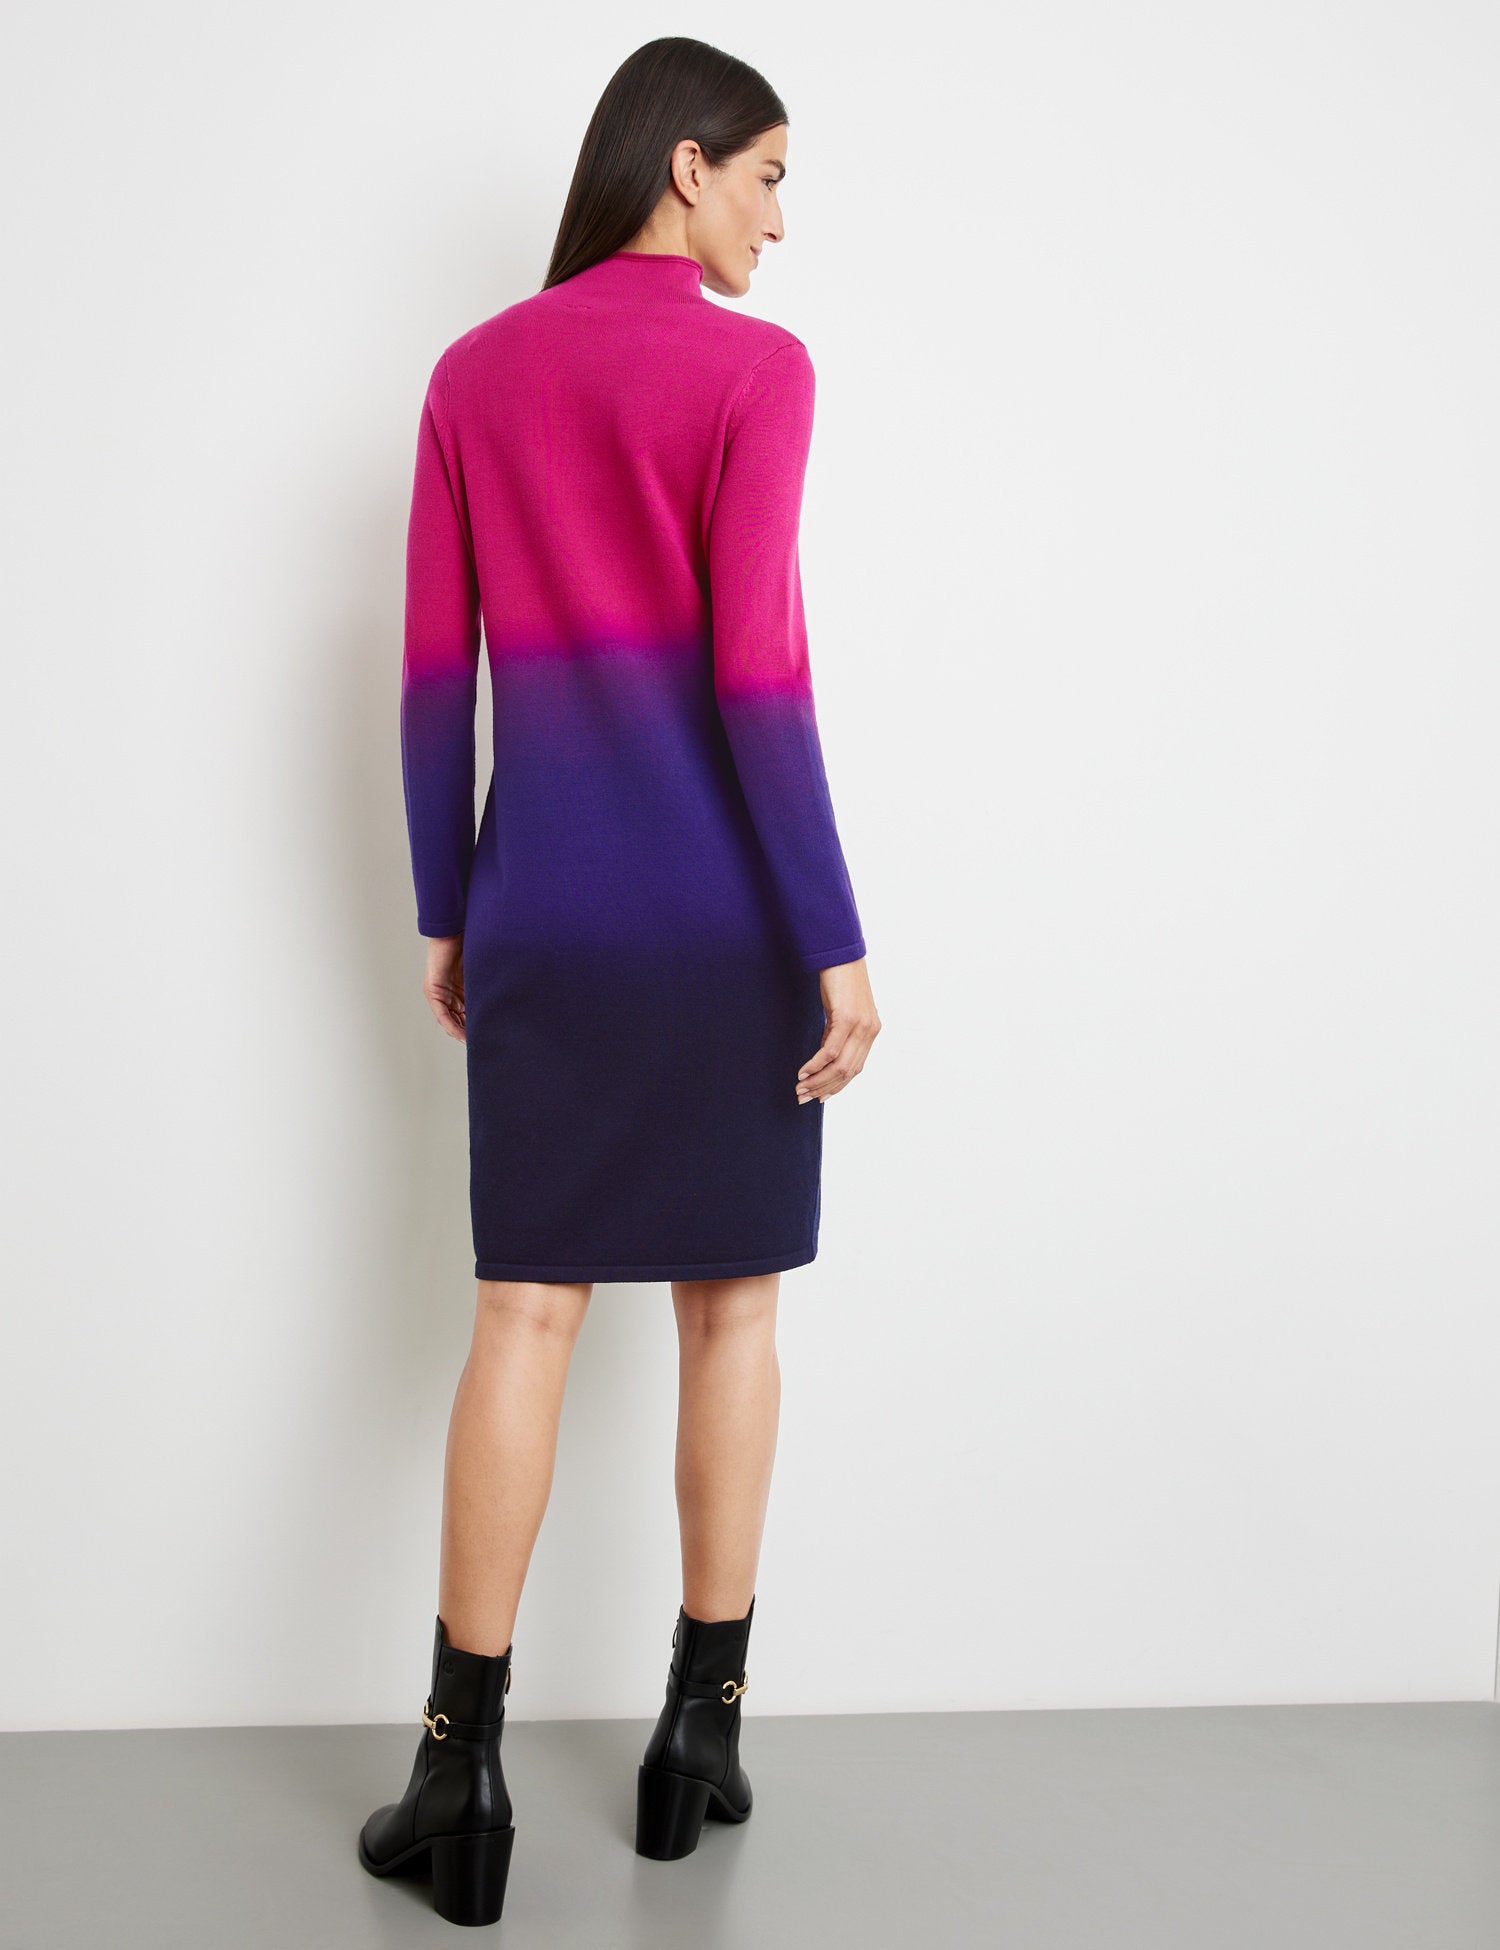 Knitted Dress With A Stand-Up Collar And Colour Graduation_280053-35708_3038_06